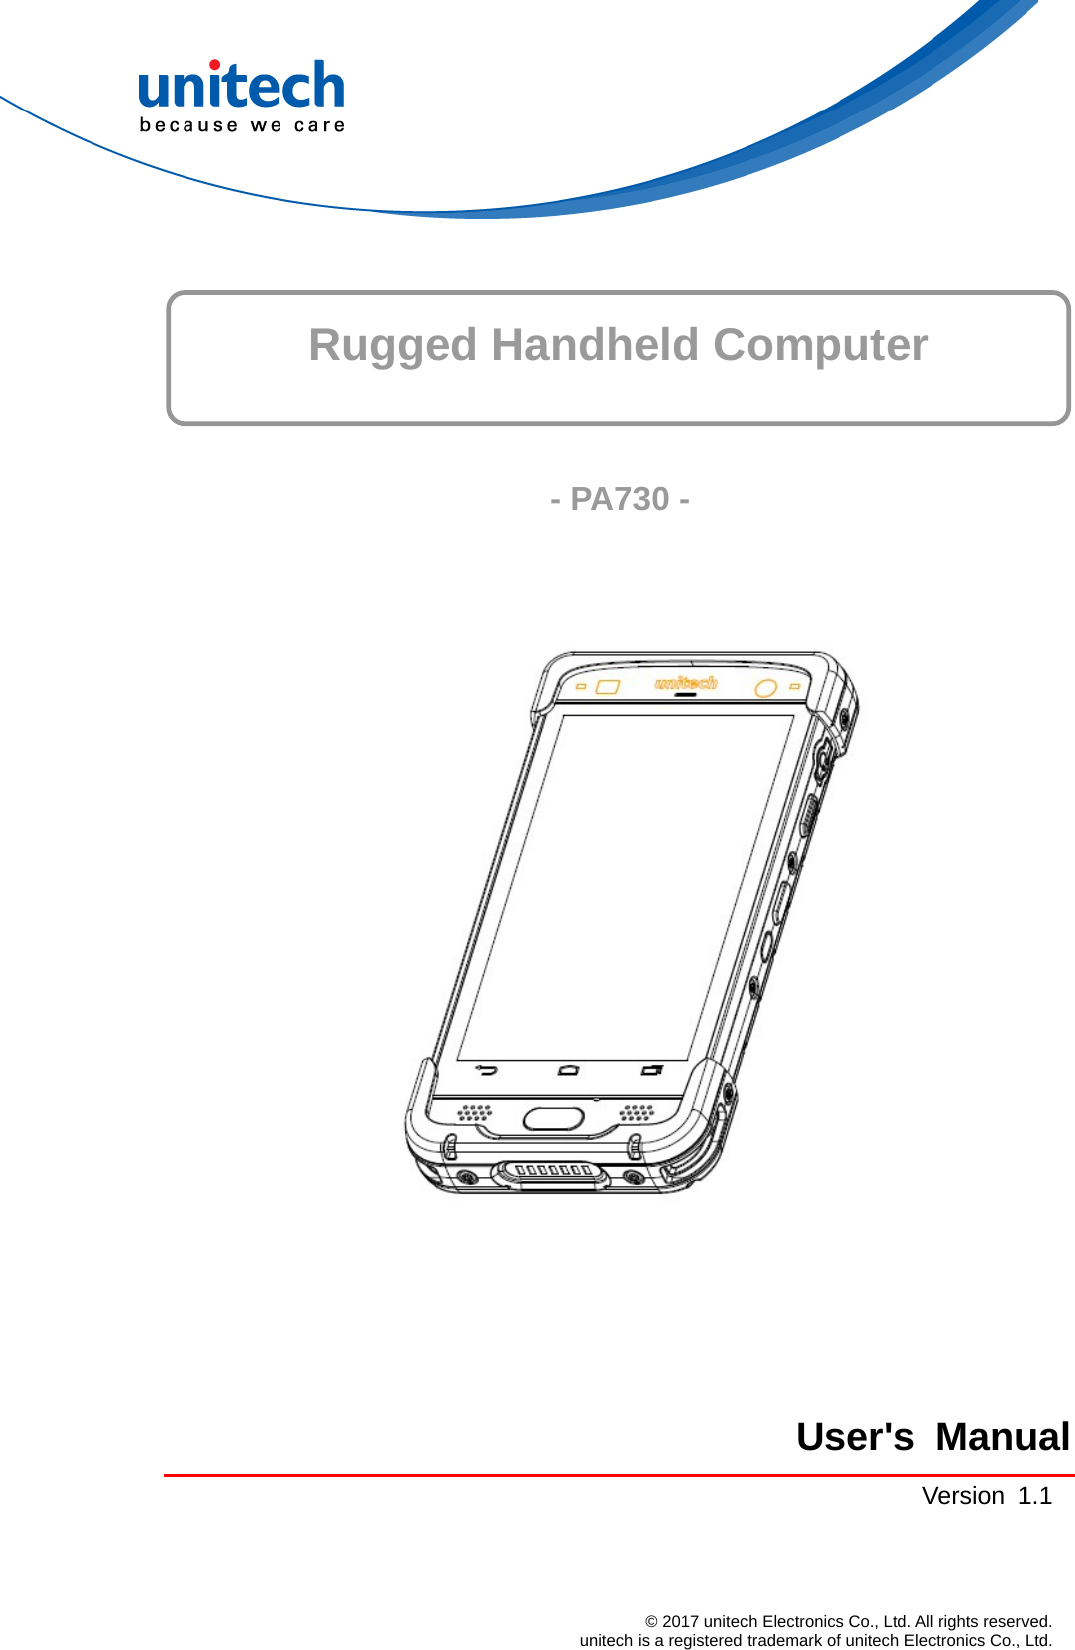     Rugged Handheld Computer   - PA730 -       User&apos;s ManualVersion 1.1 © 2017 unitech Electronics Co., Ltd. All rights reserved.   unitech is a registered trademark of unitech Electronics Co., Ltd. 